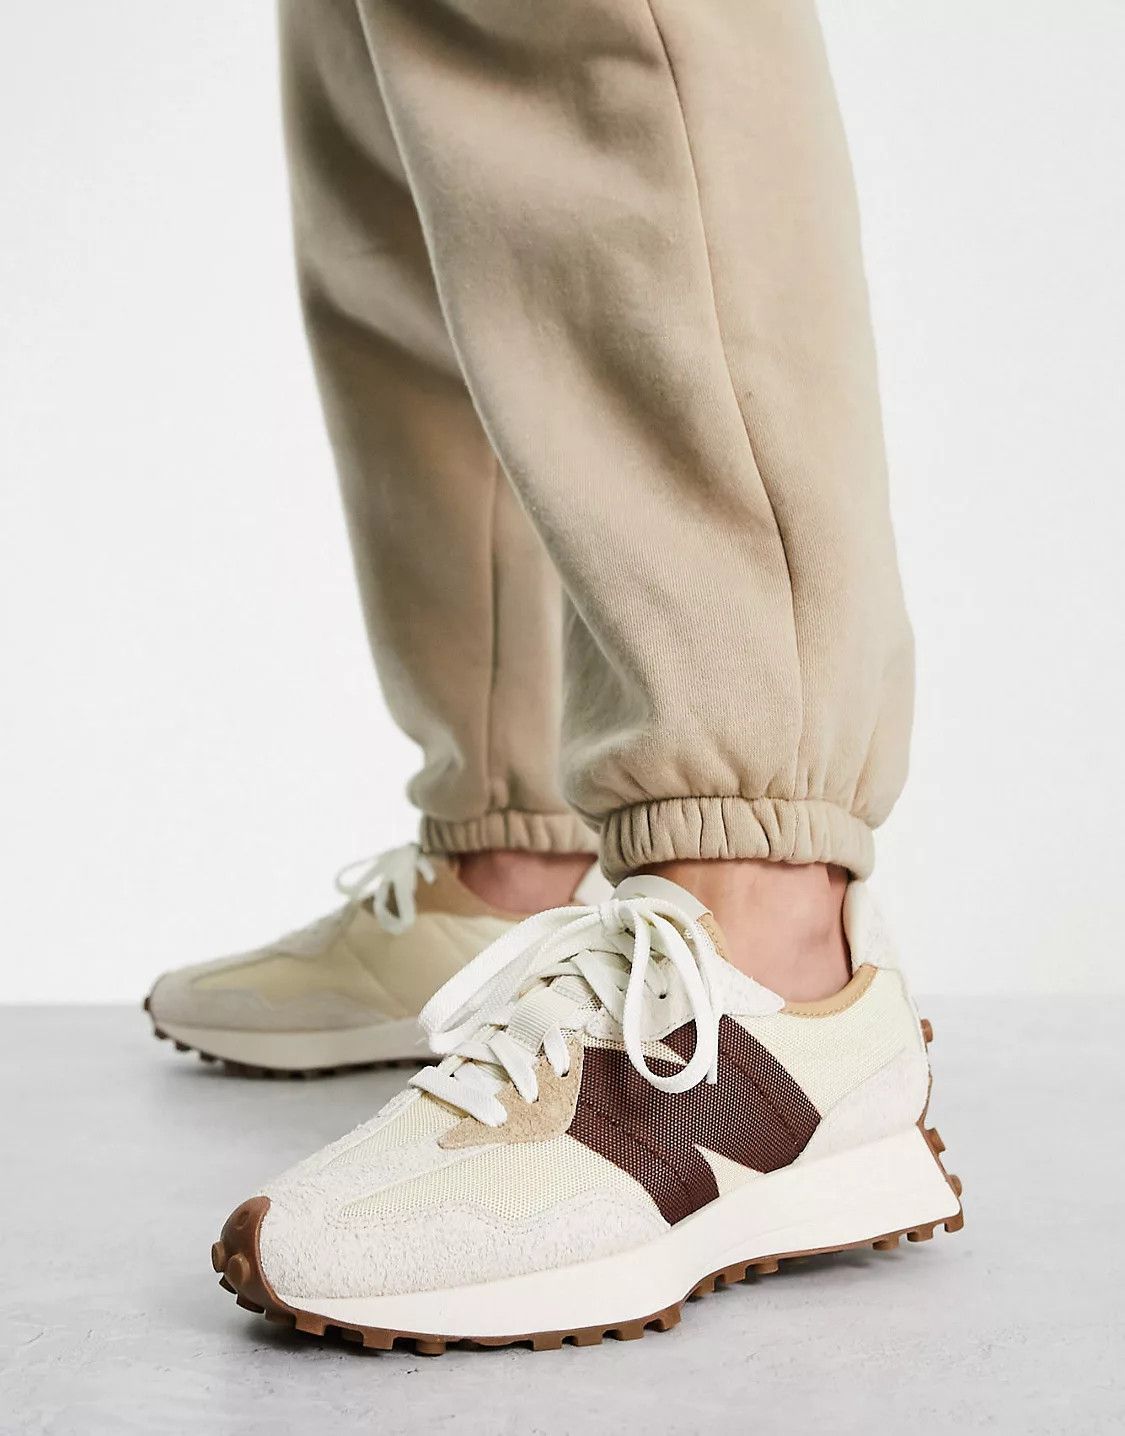 New Balance 327 sneakers in off white with brown detail - Exclusive to ASOS | ASOS (Global)